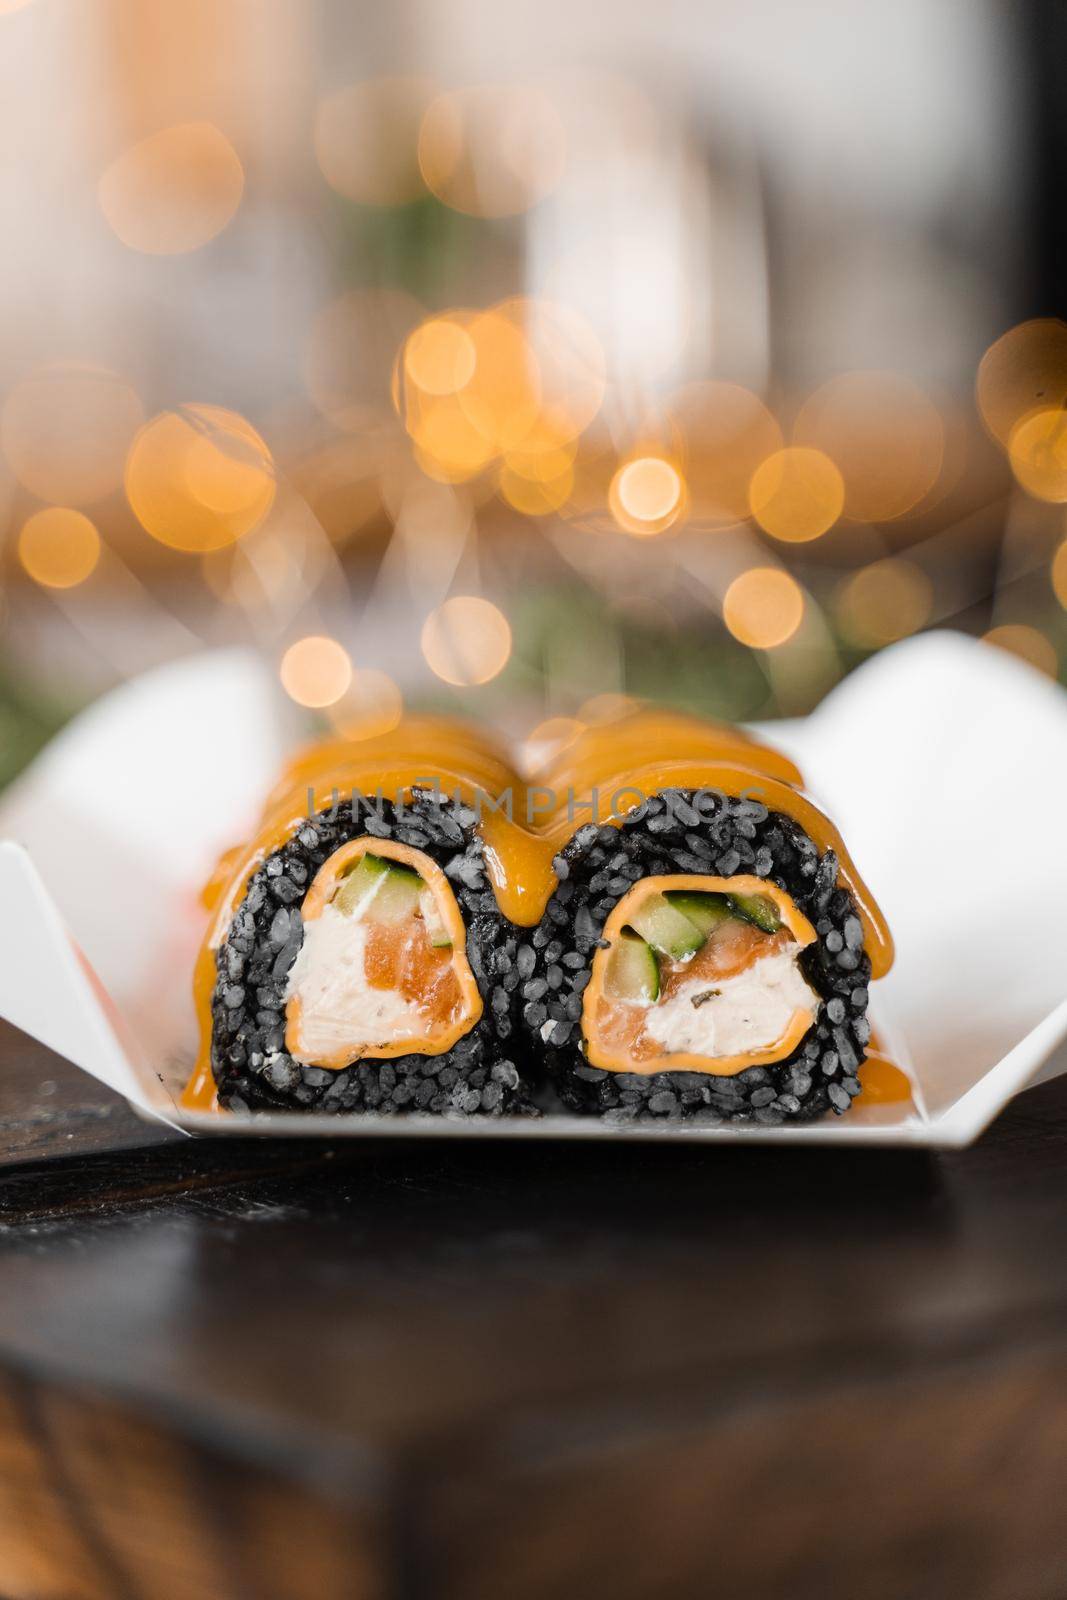 Sushi black roll on the new year lights background. Christmas lights decoration. Food delivery at new year eve. Roll with black rice, salmon, cucumber and cheese